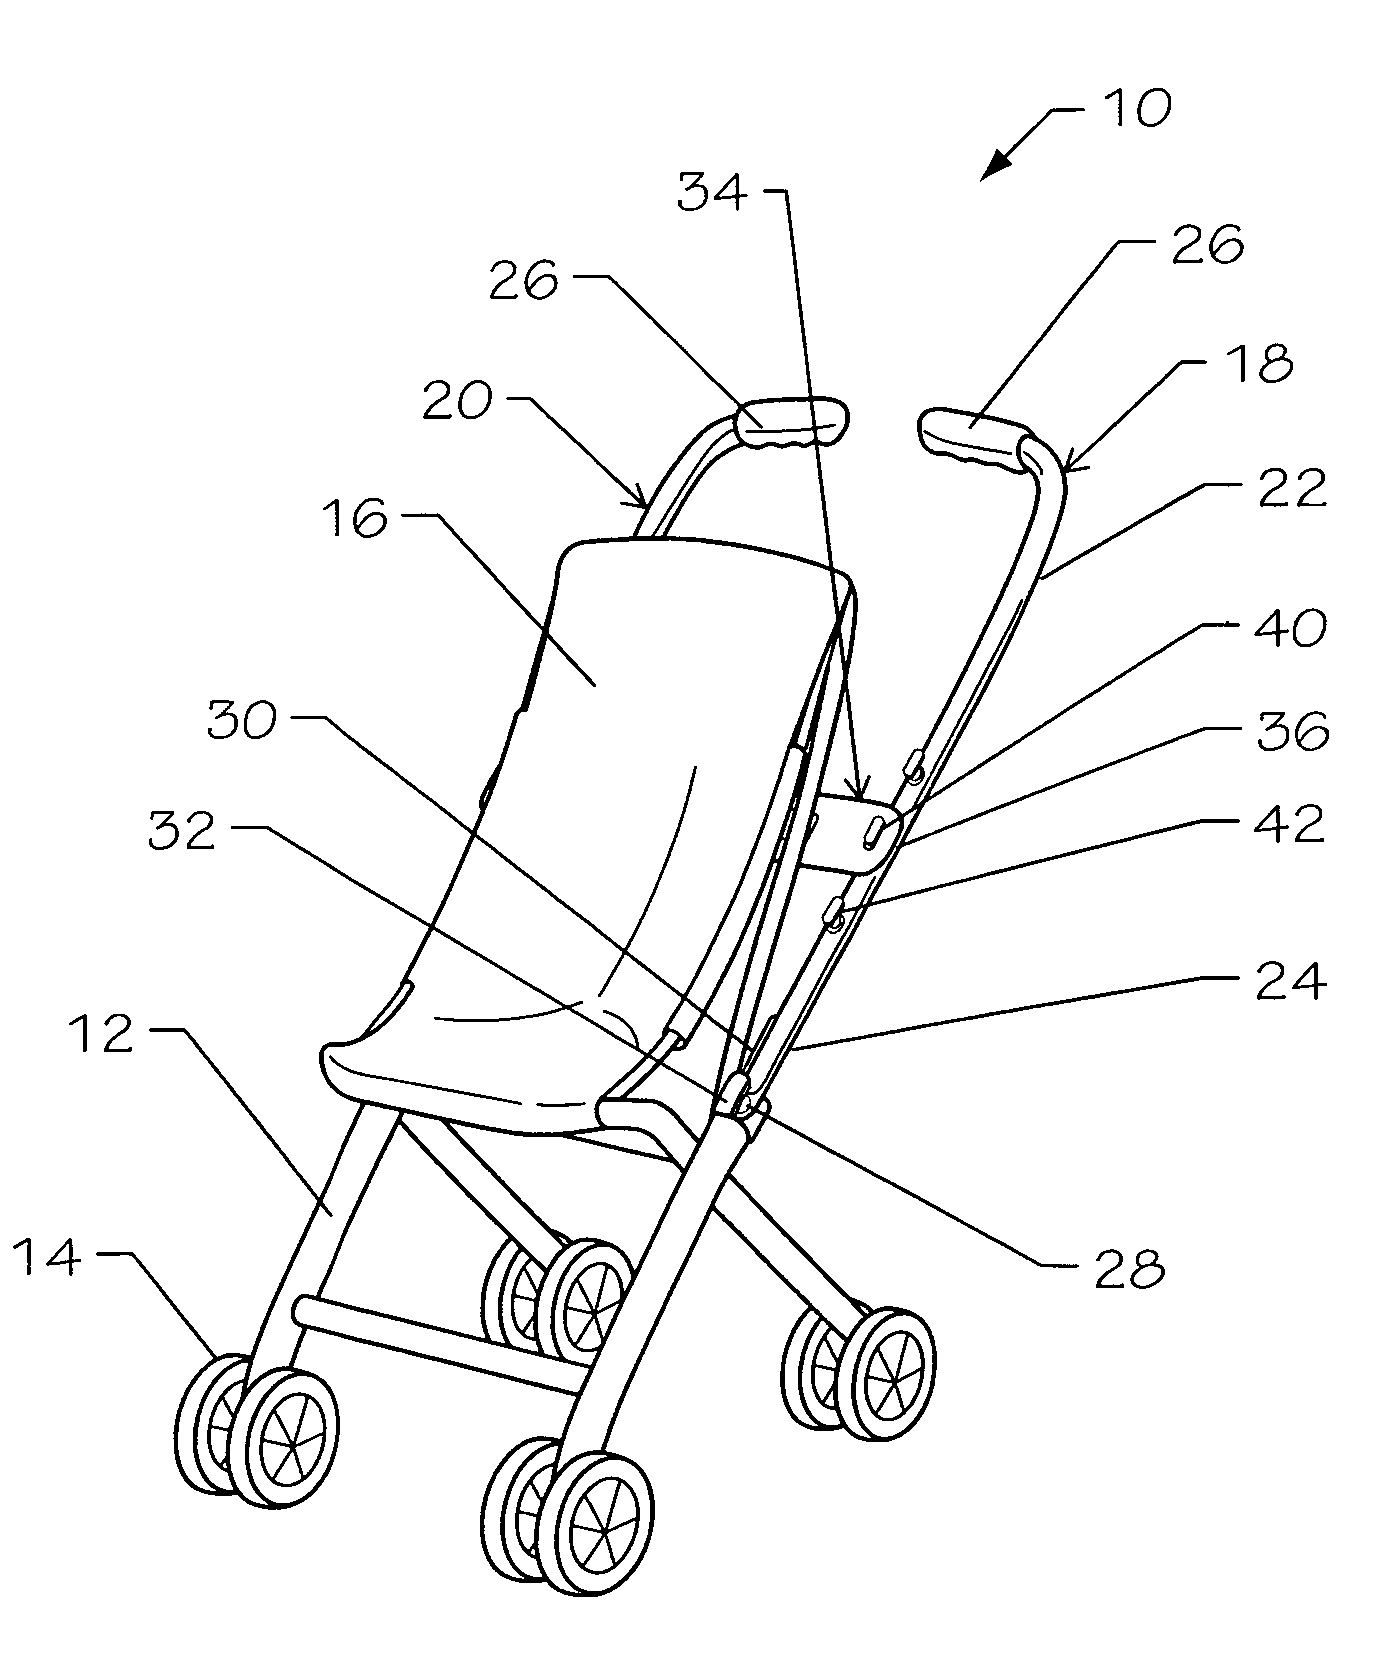 Exercise stroller device